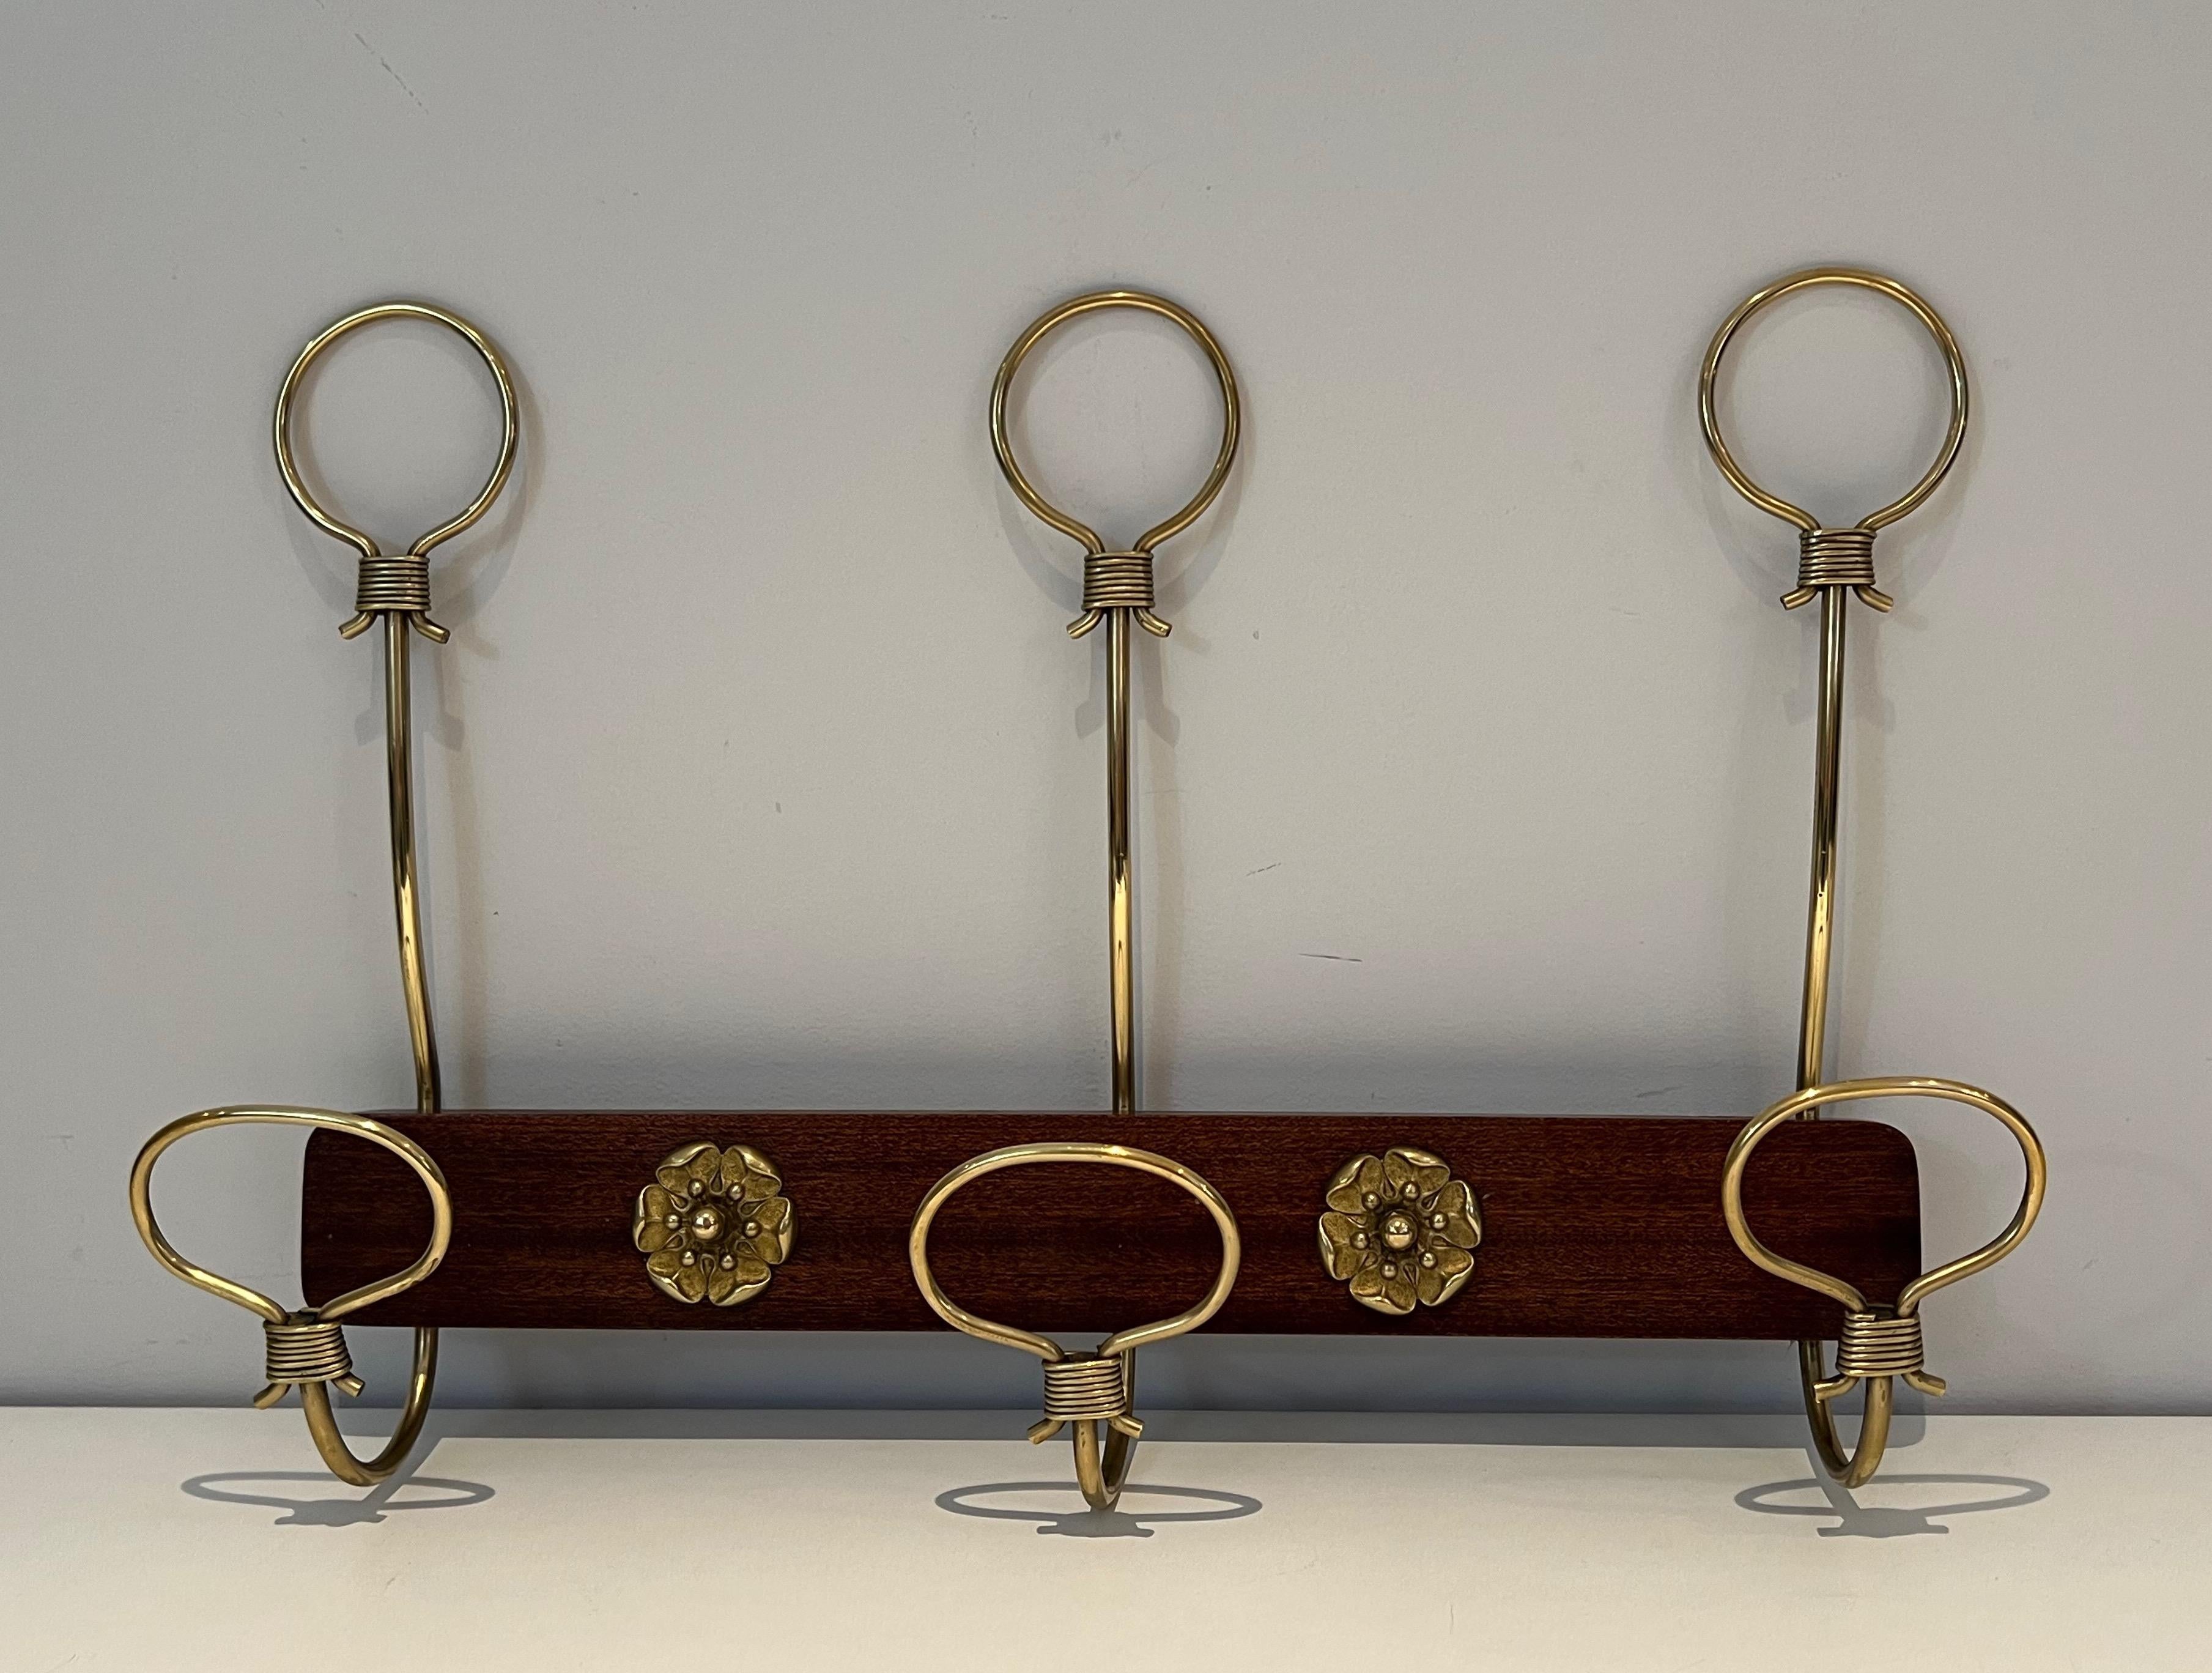 This very nice and elegants wall-mounted coat rack is made of mahogany and brass. This is a French work. Circa 1940